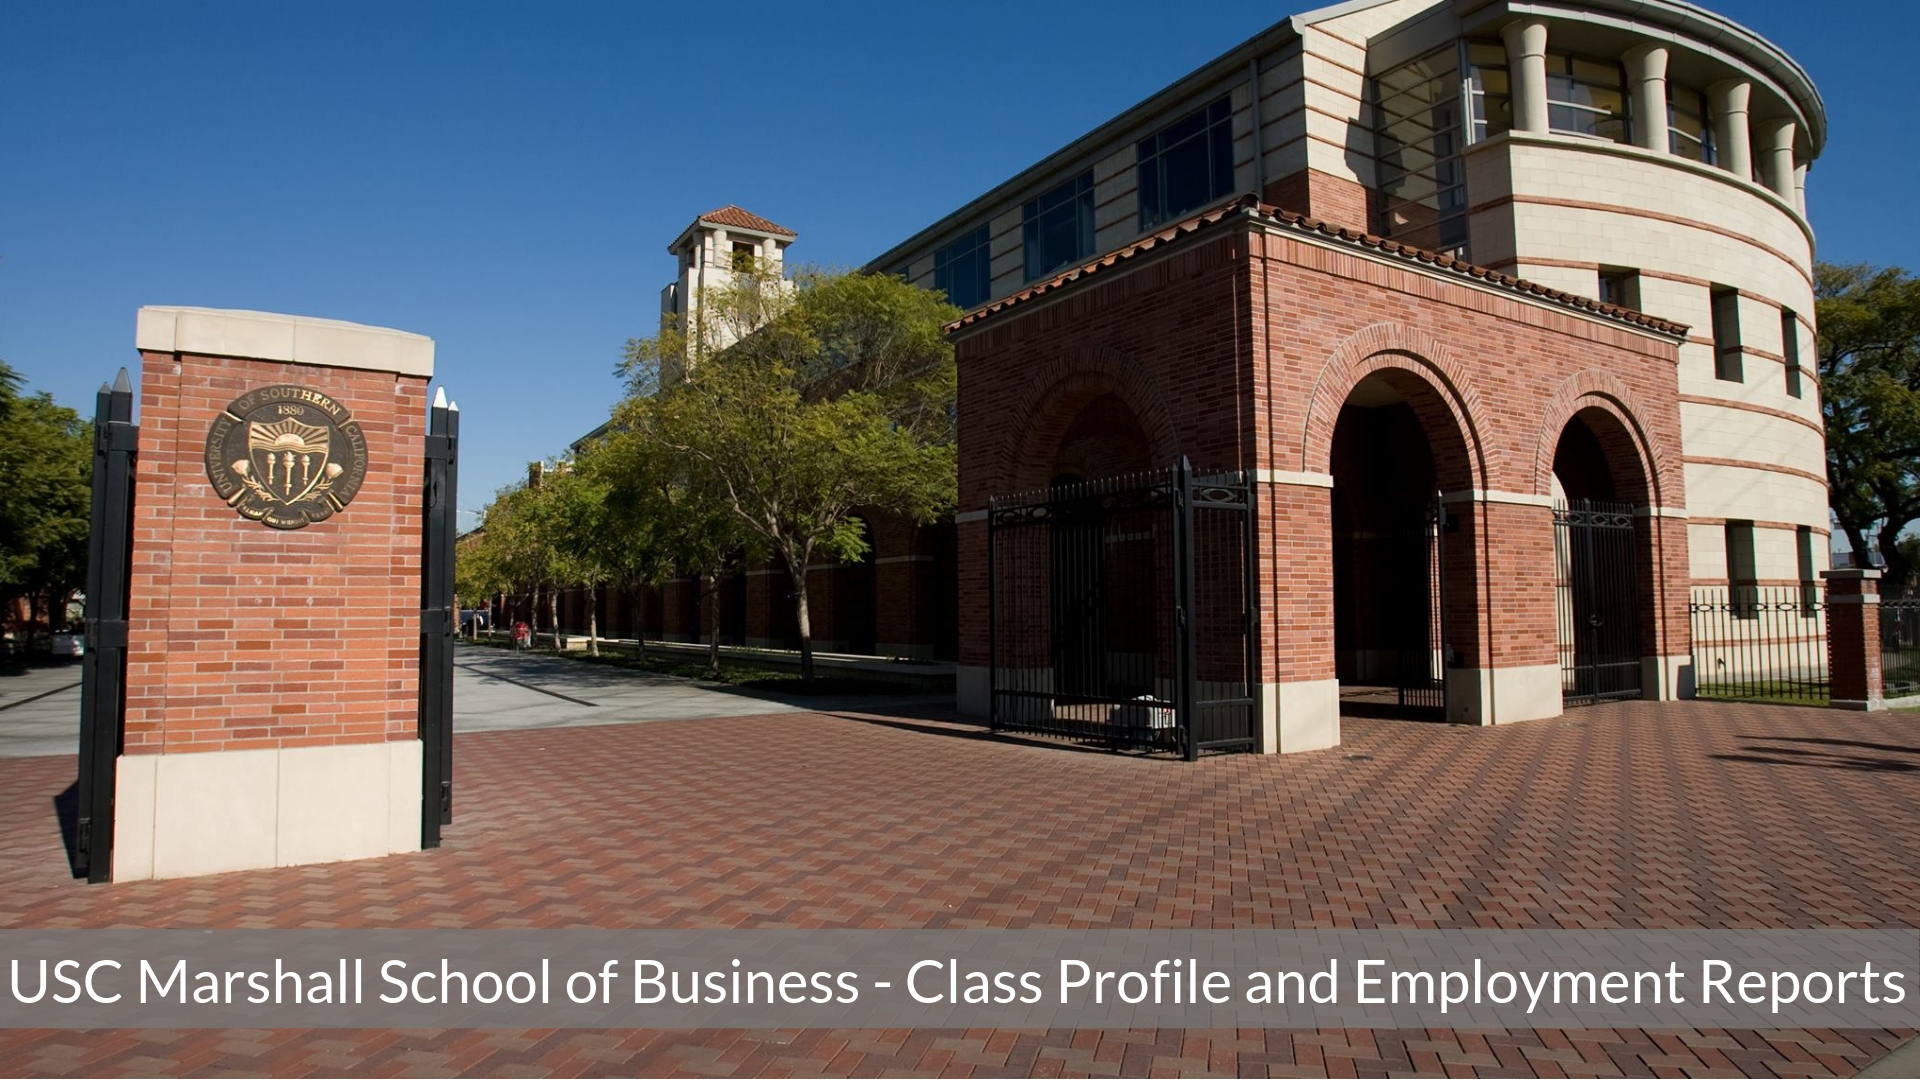 USC Marshall School of Business - USC MBA Program - Class Profile and Employment Reports